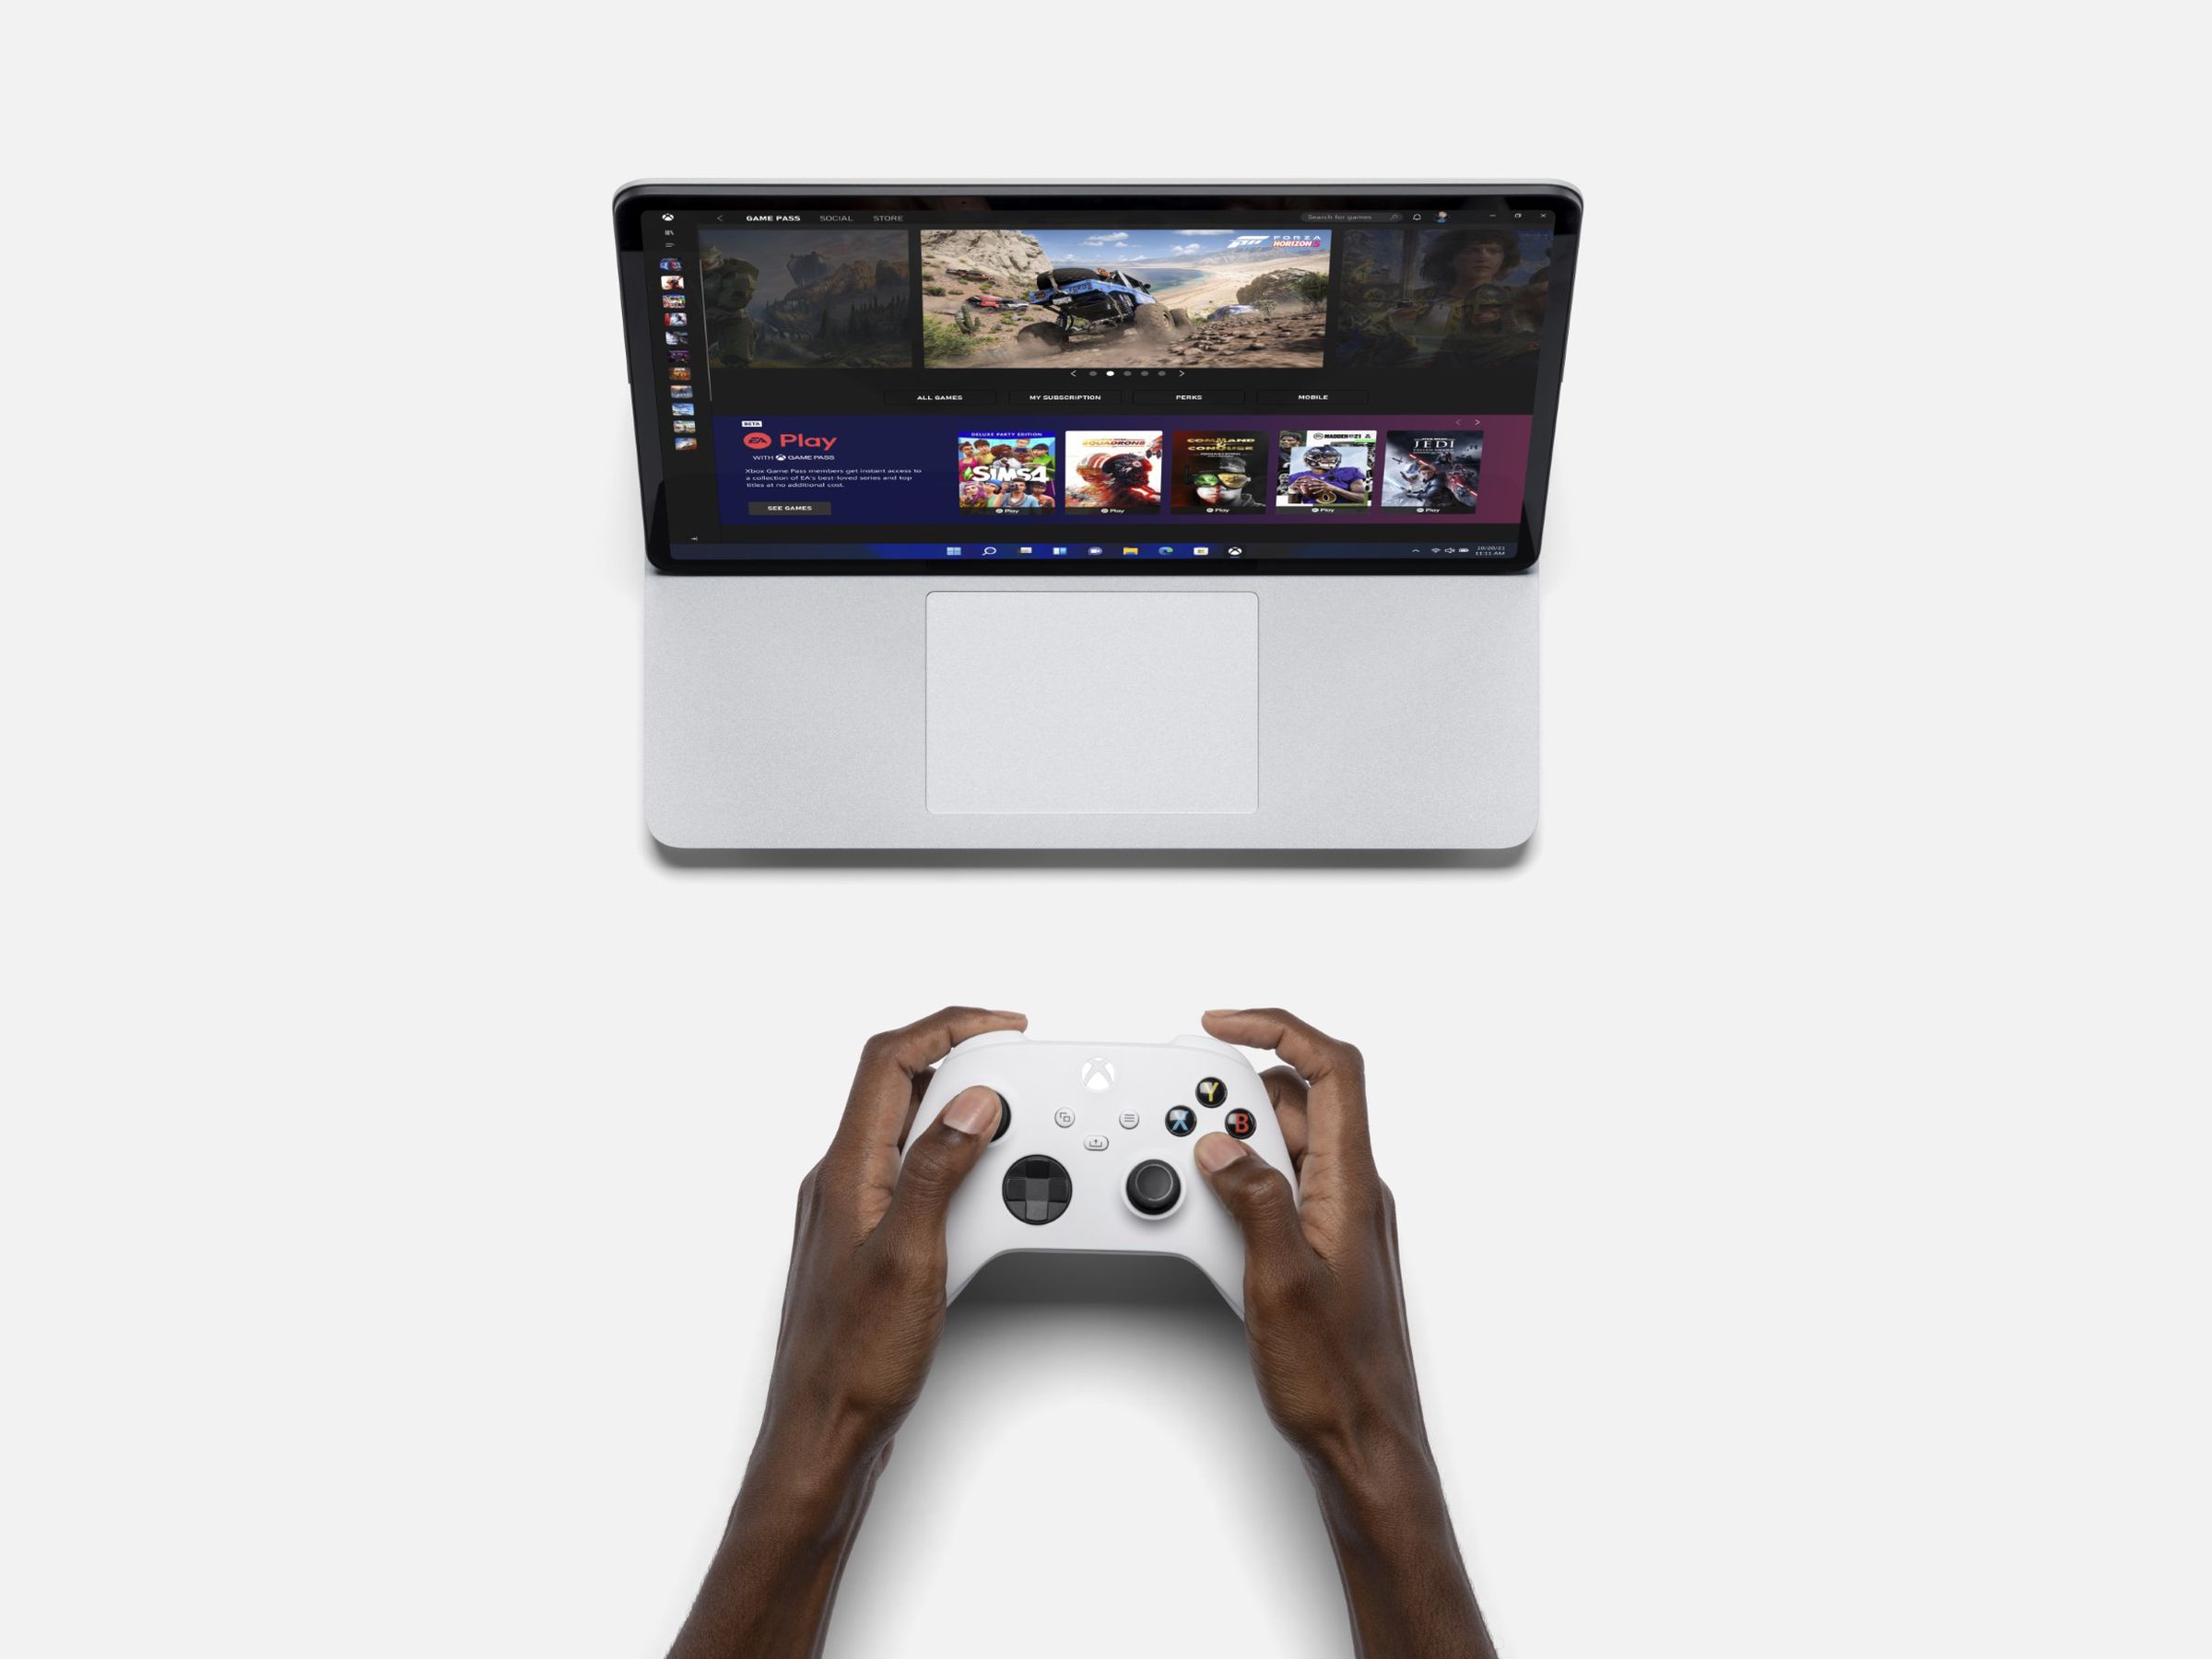 A Surface Studio laptop with an Xbox controller